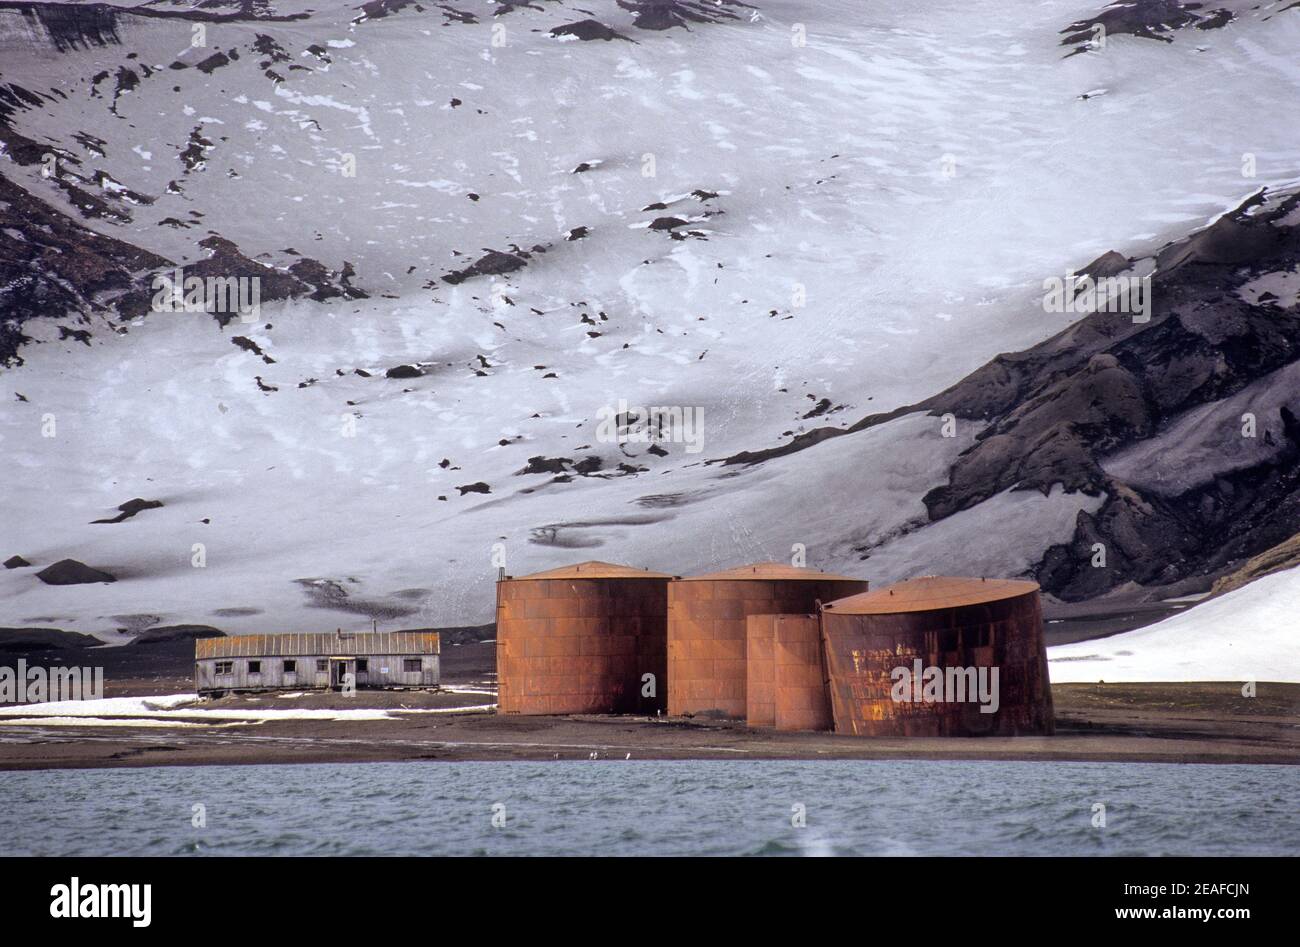 Silos and a house of a former whaling factory on Whalers Bay in Deception Island in Antarctica Stock Photo